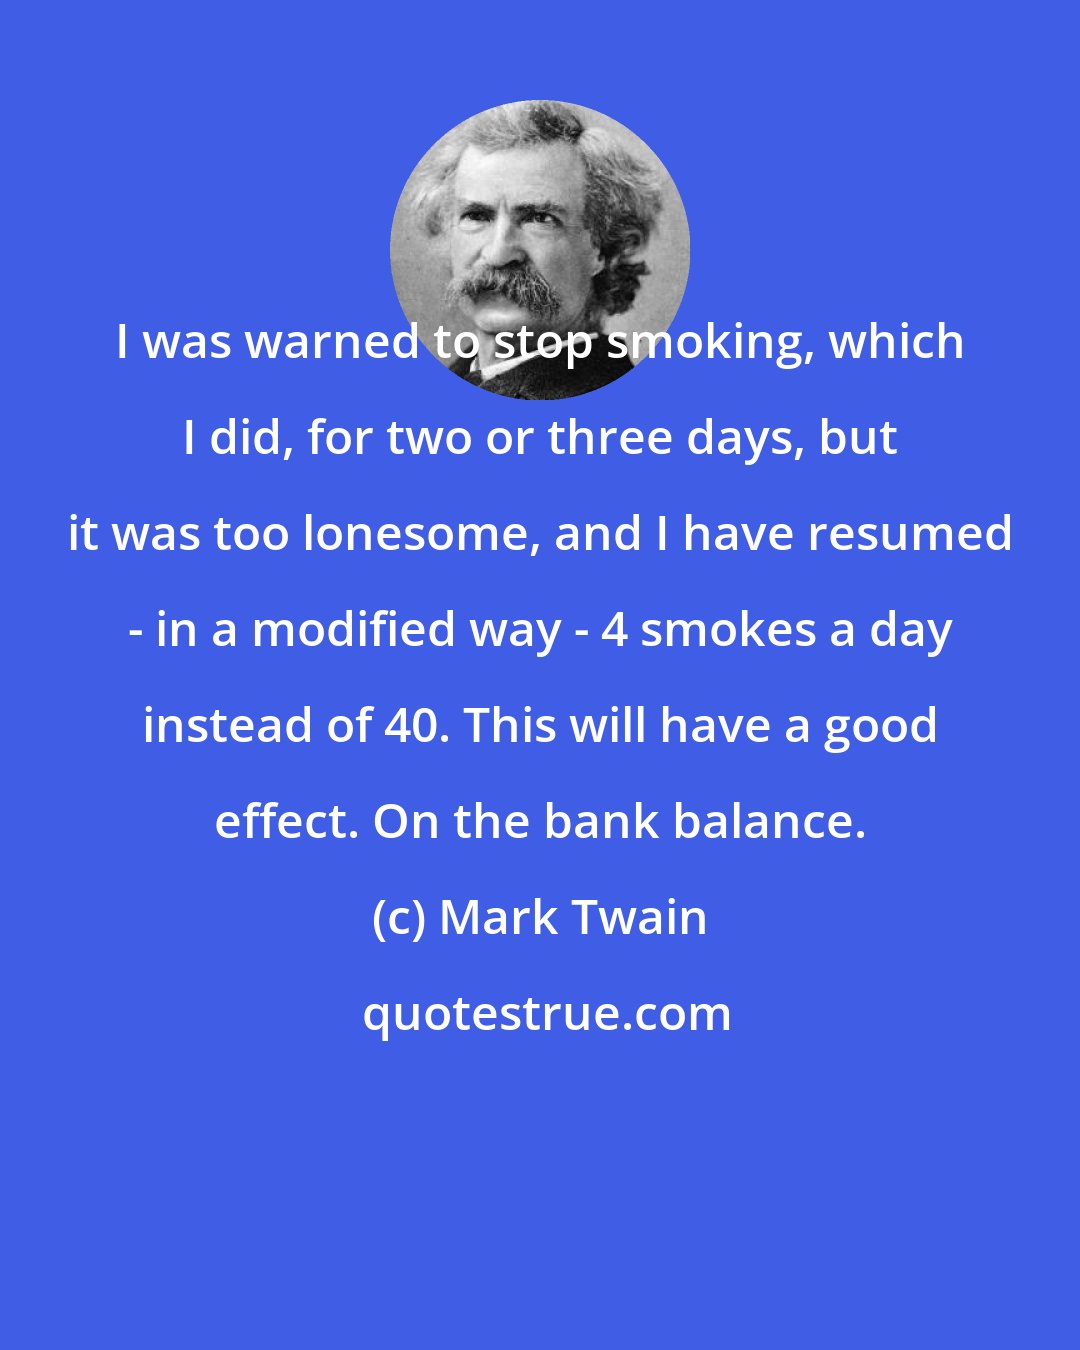 Mark Twain: I was warned to stop smoking, which I did, for two or three days, but it was too lonesome, and I have resumed - in a modified way - 4 smokes a day instead of 40. This will have a good effect. On the bank balance.